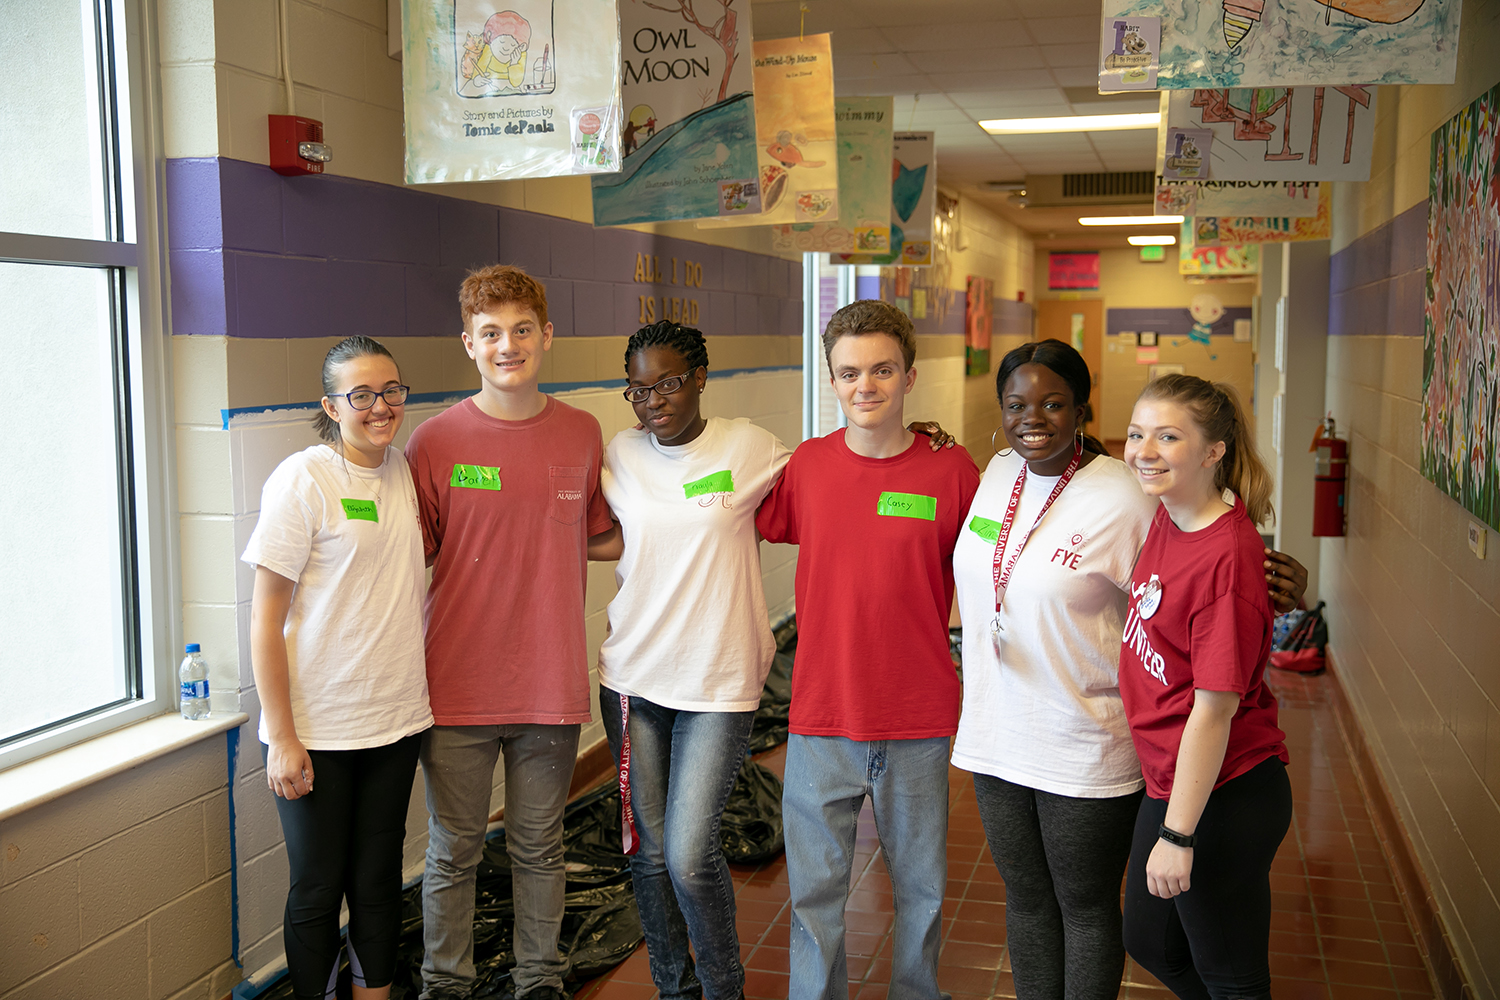 UA Students Strive to Improve Community Through Service Projects